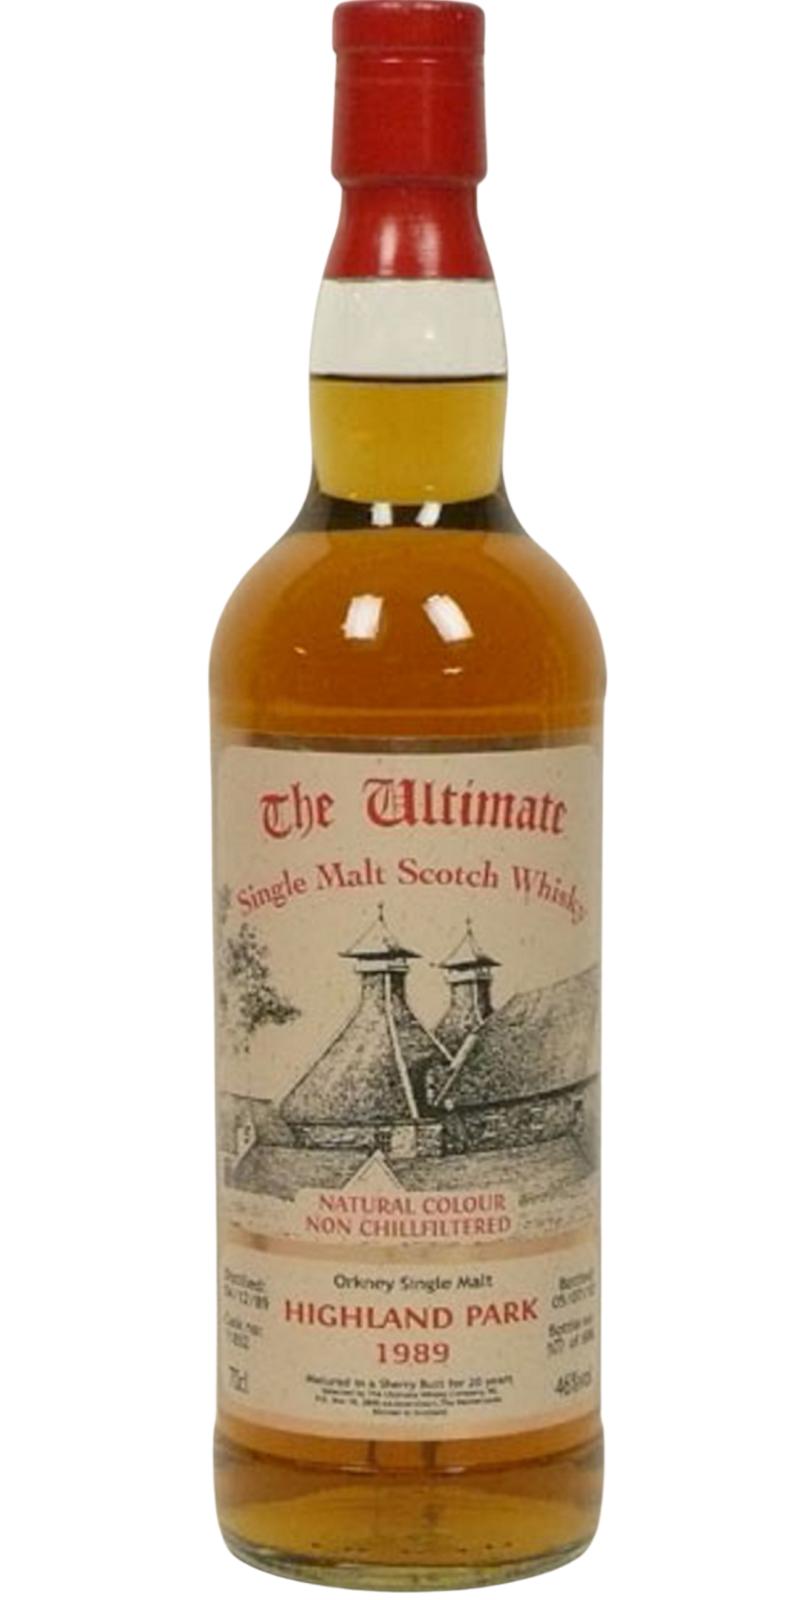 Highland Park 1989 vW The Ultimate Sherry Butt 11852 46% 700ml